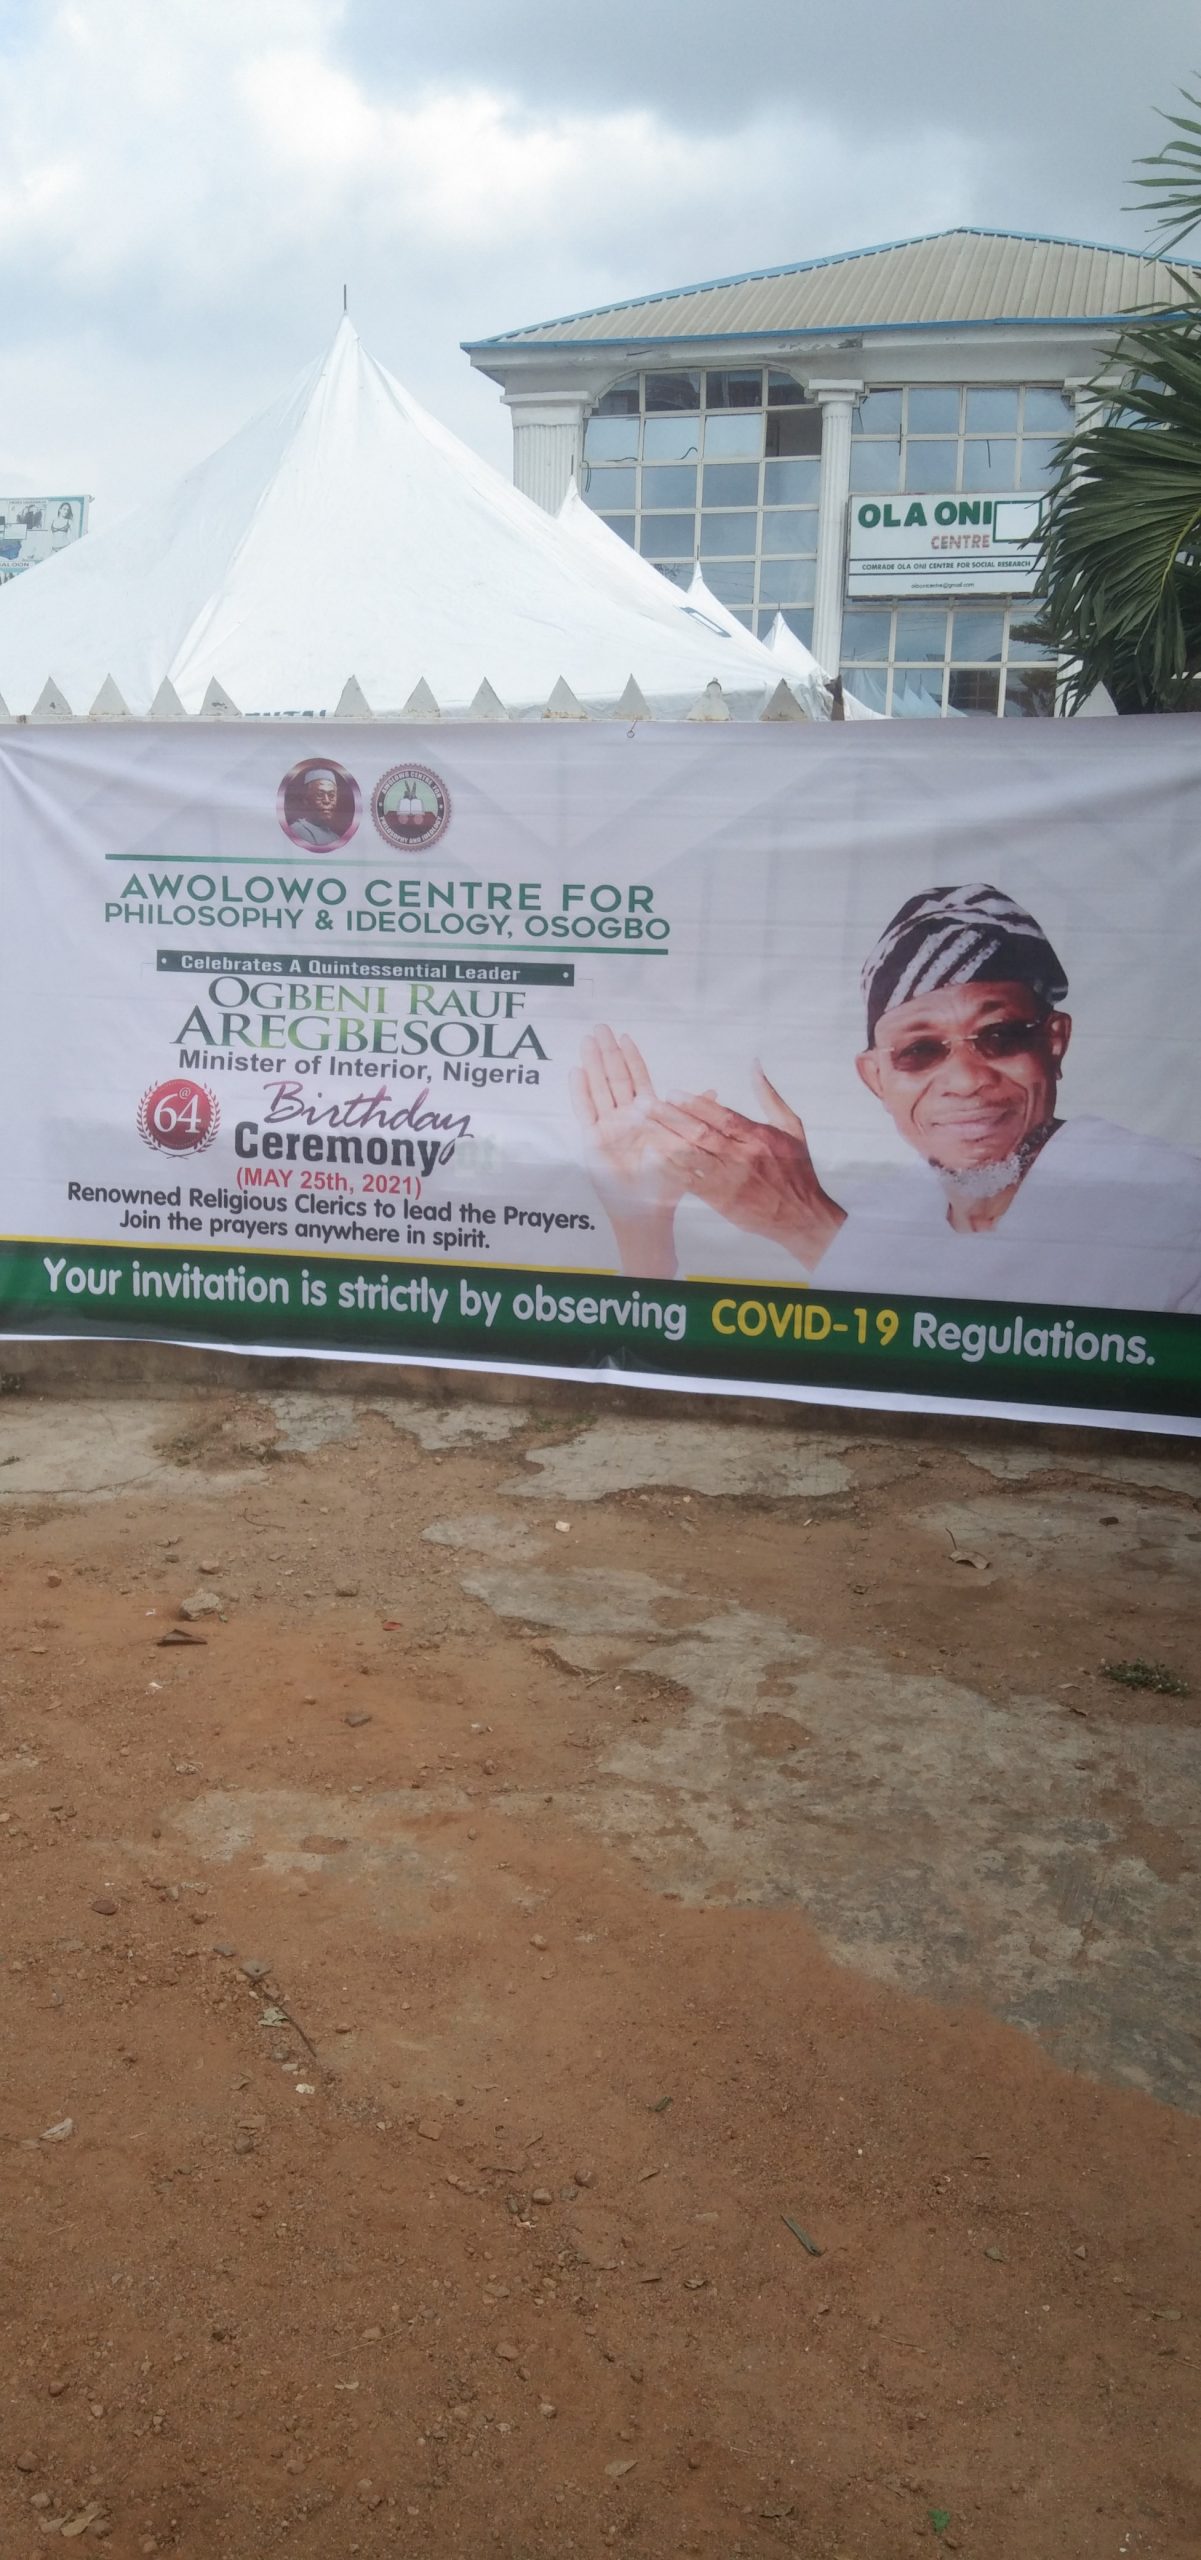 Photo News: Awolowo Centre Holds Programme To Honour Aregbesola